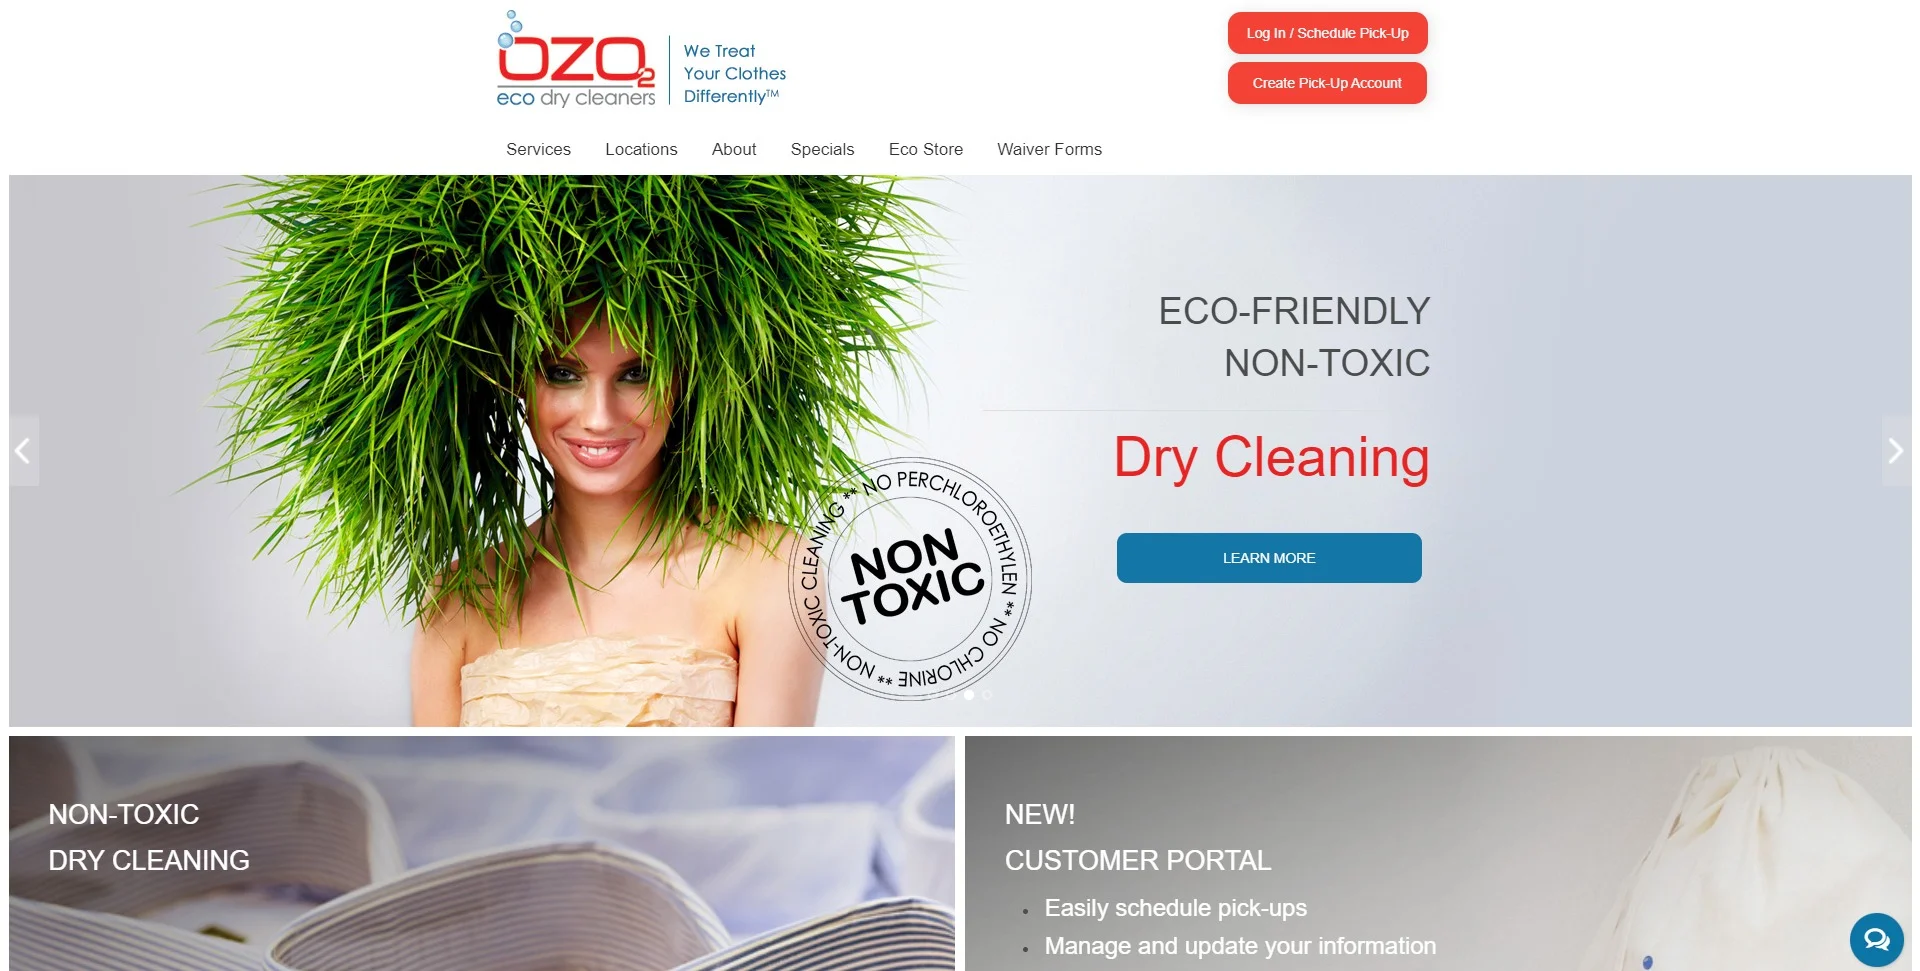 OZO Dry Cleaning